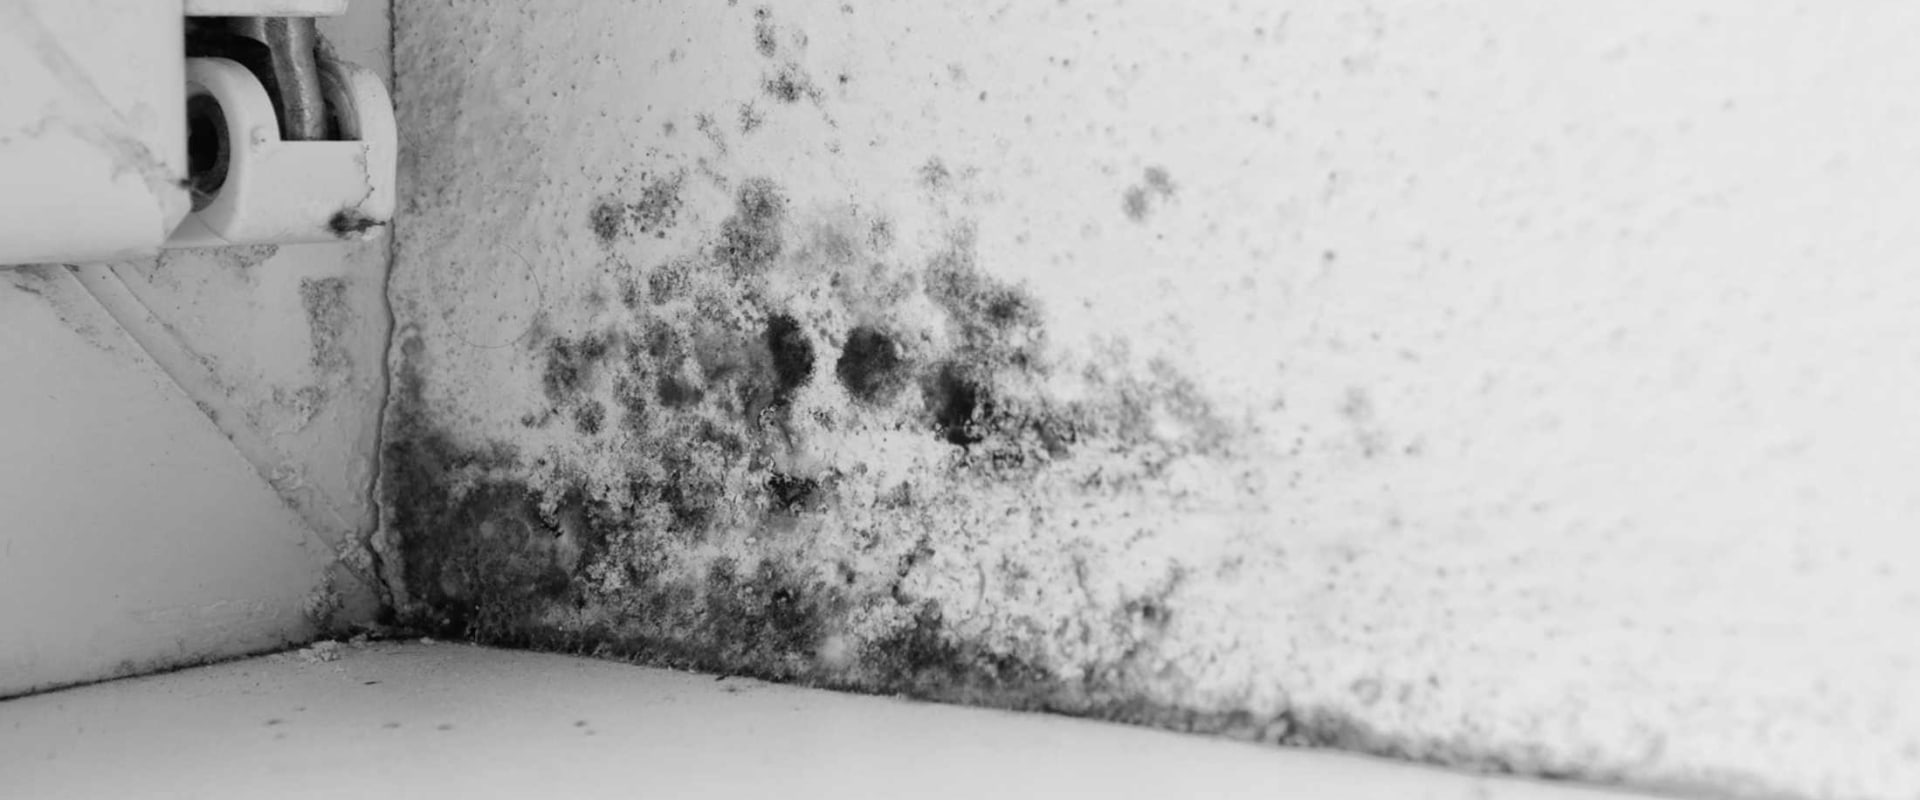 What is the best home remedy to kill black mold?